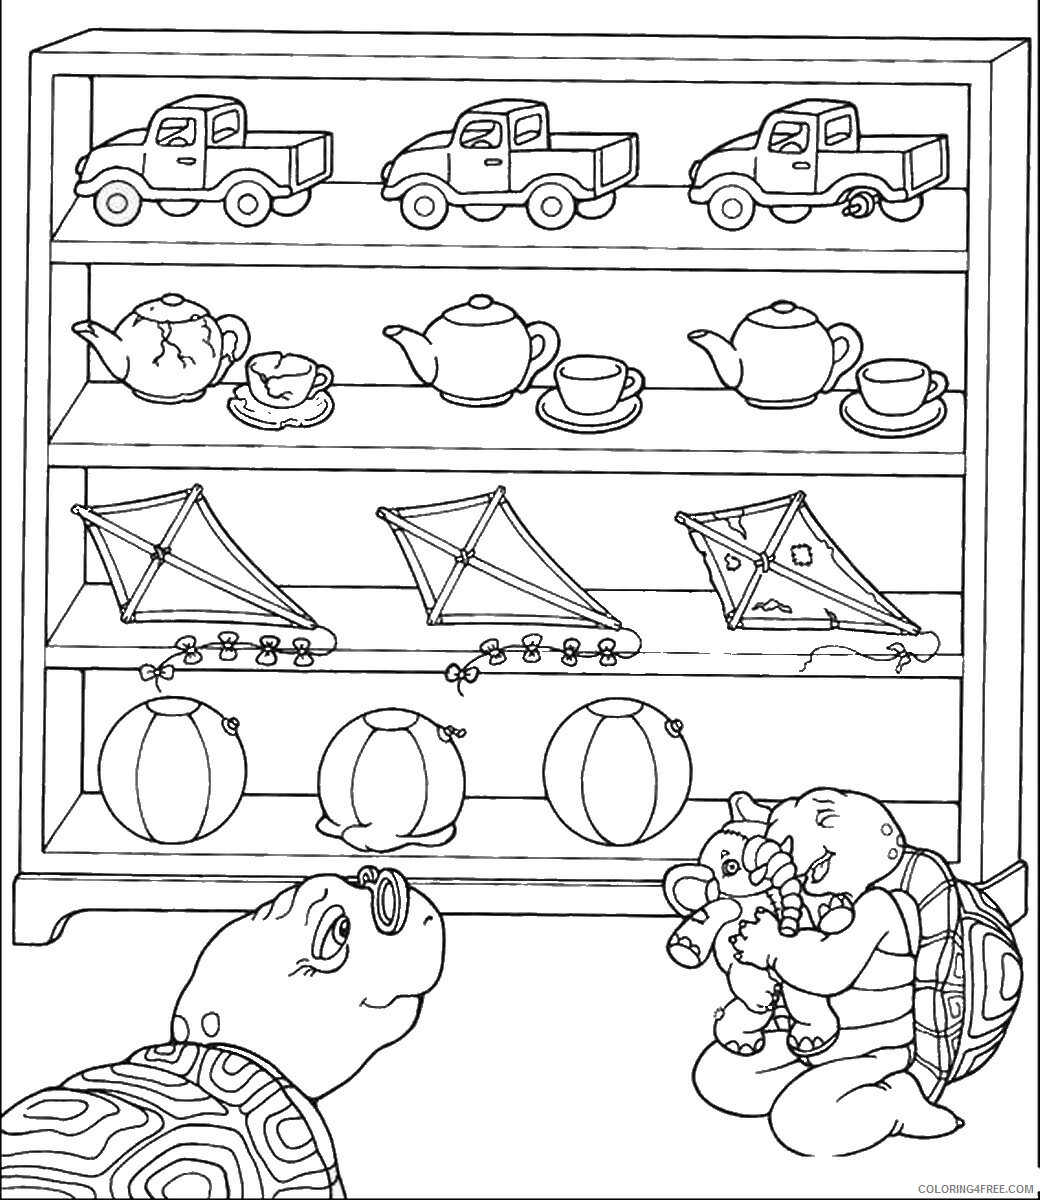 Franklin and Friends Coloring Pages TV Film franklin_cl_06 Printable 2020 03010 Coloring4free